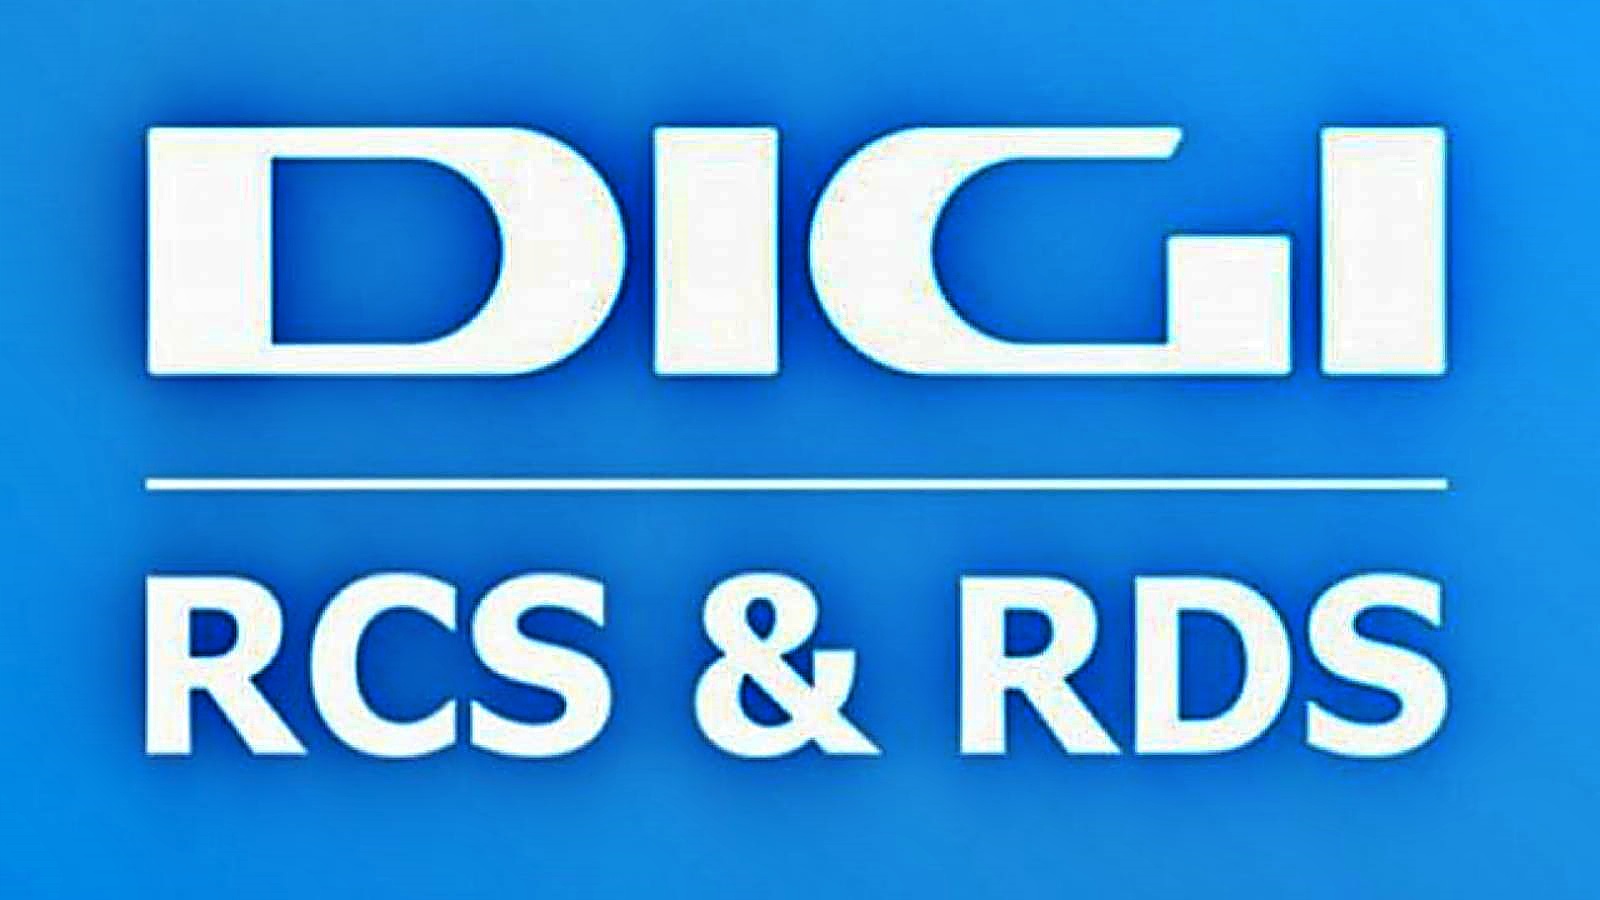 DIGI RCS & RDS Measure MILLIONS of Customers All over Romania